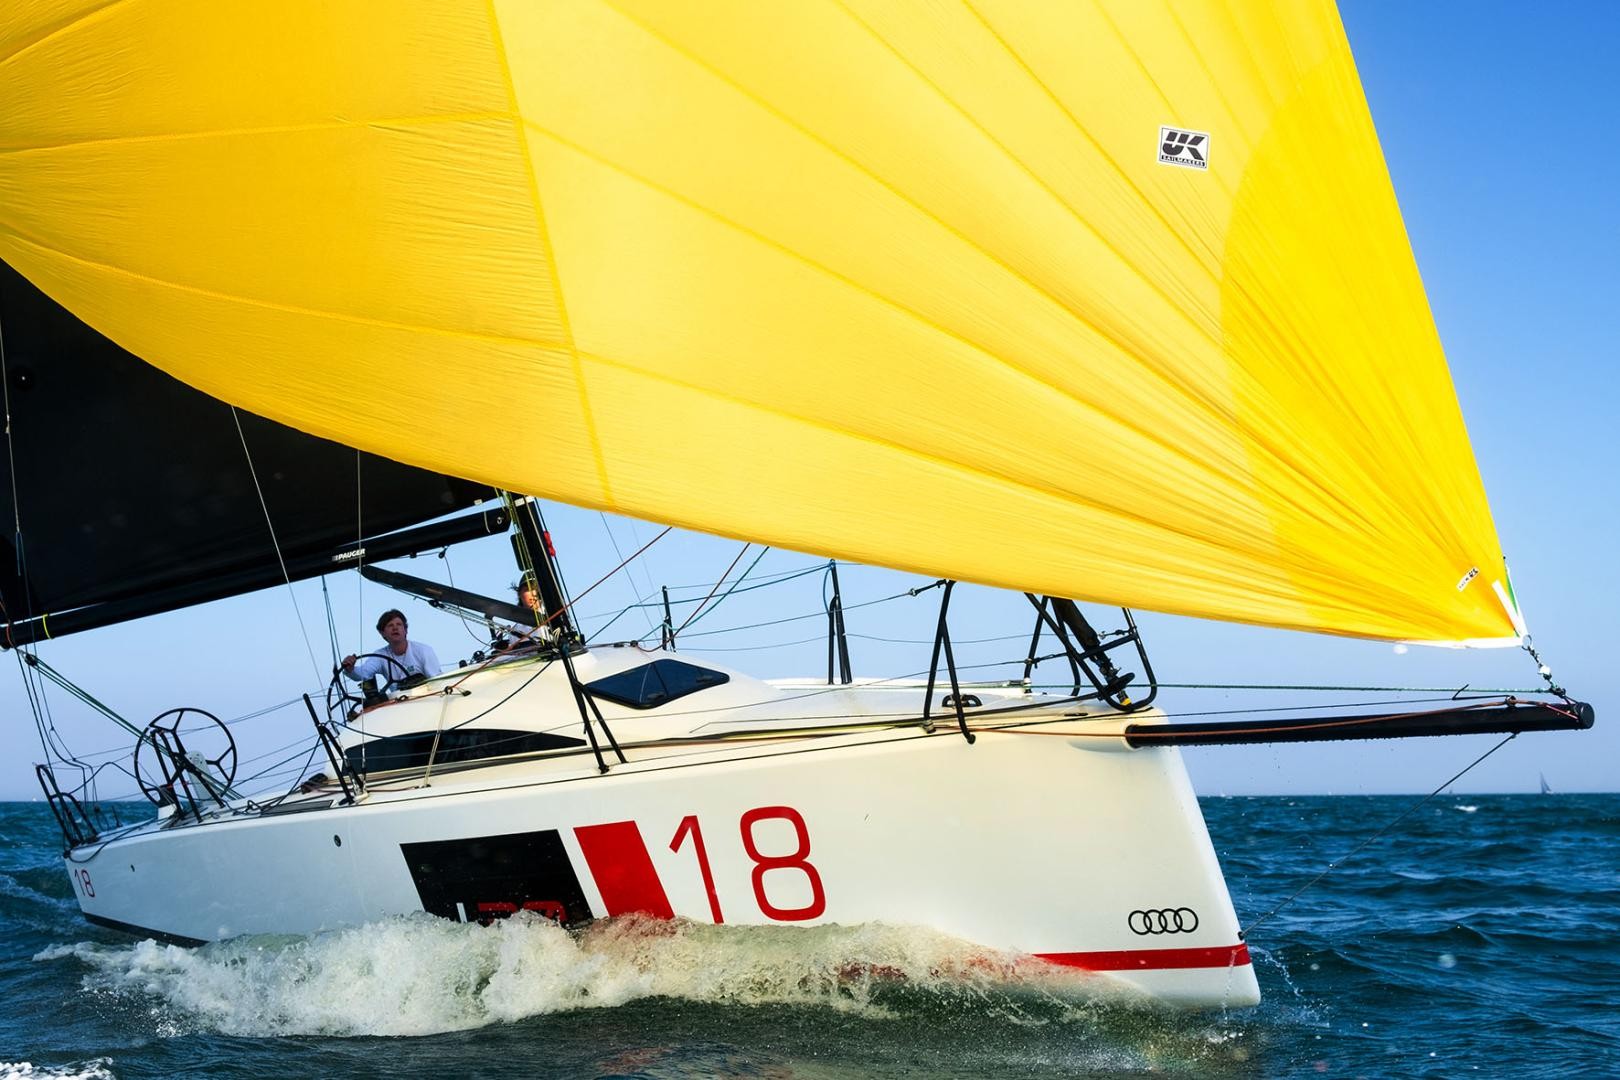 UK Sailmakers - embracing double-handed sailing